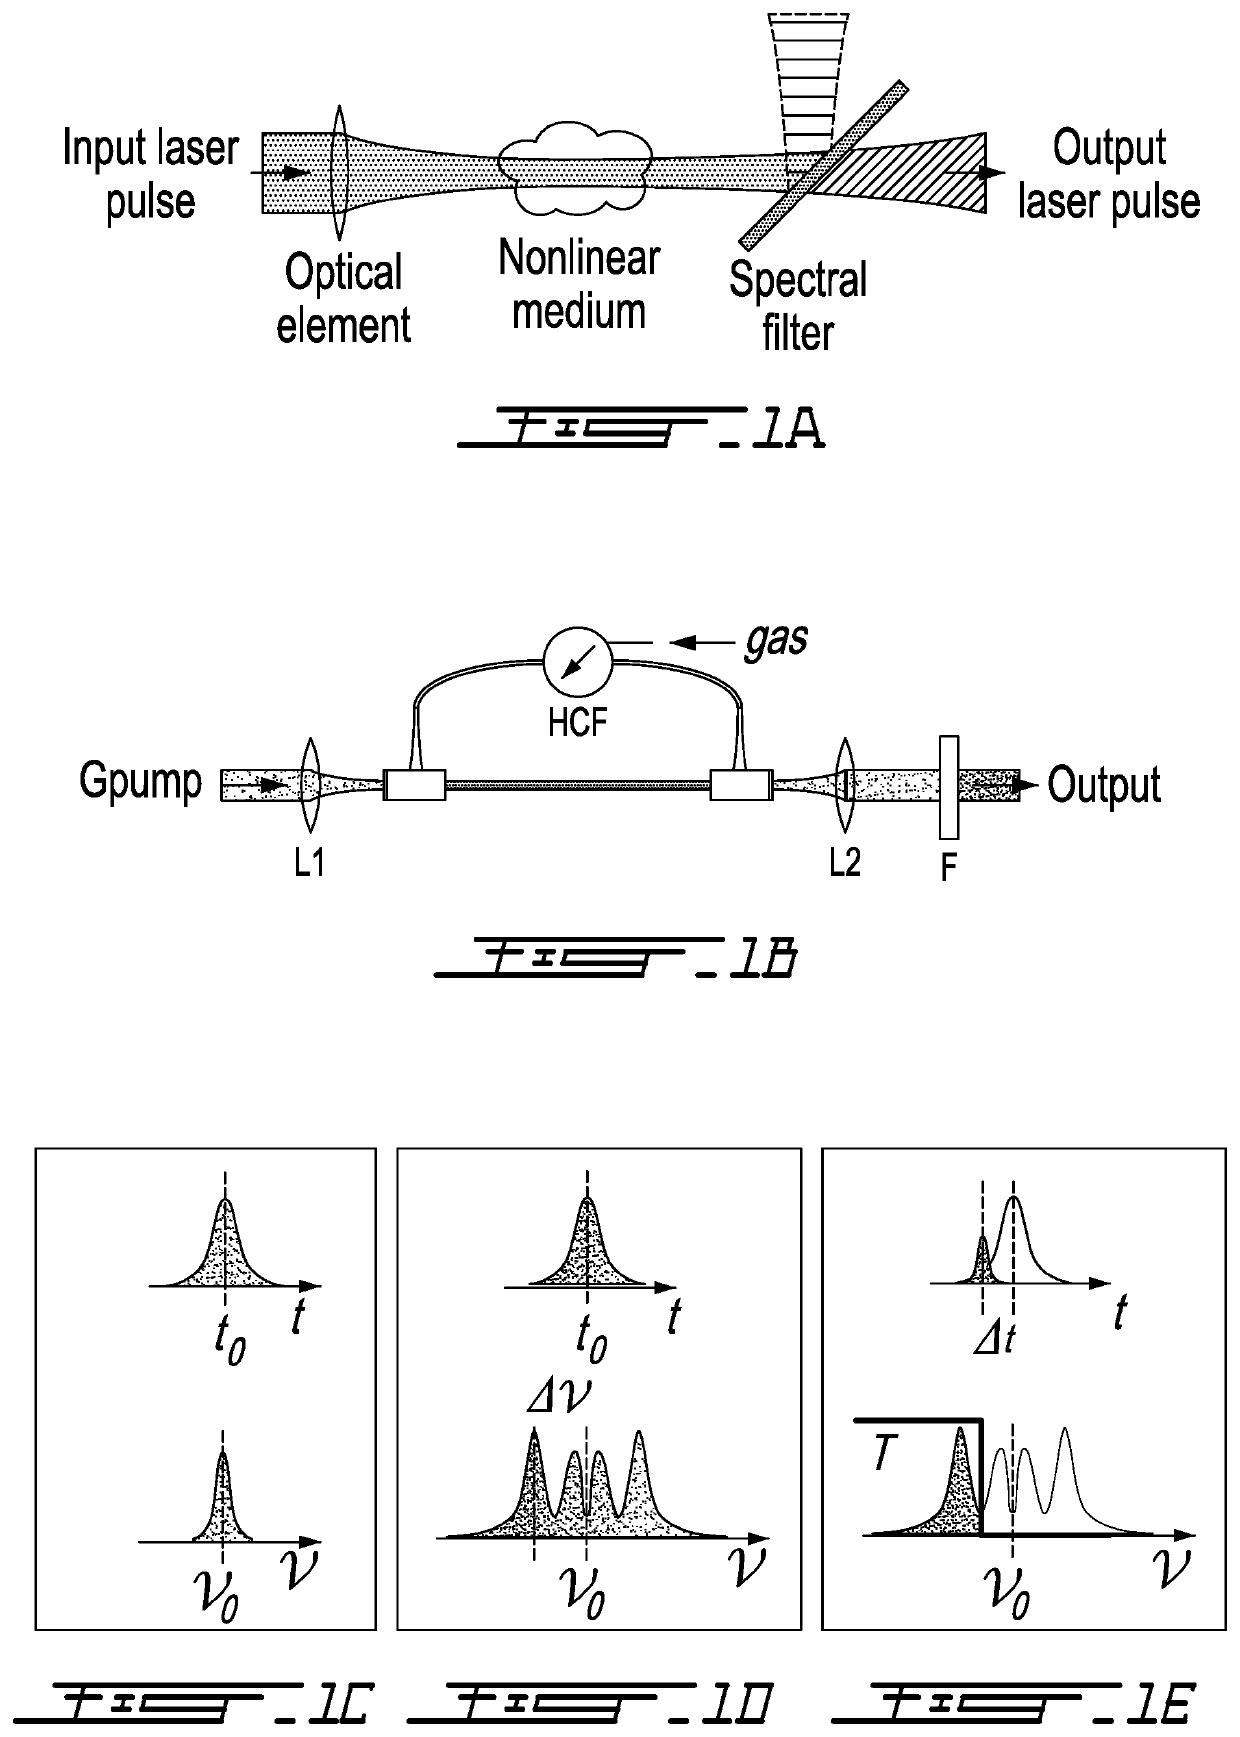 Method and system for generating tunable ultrafast optical pulses